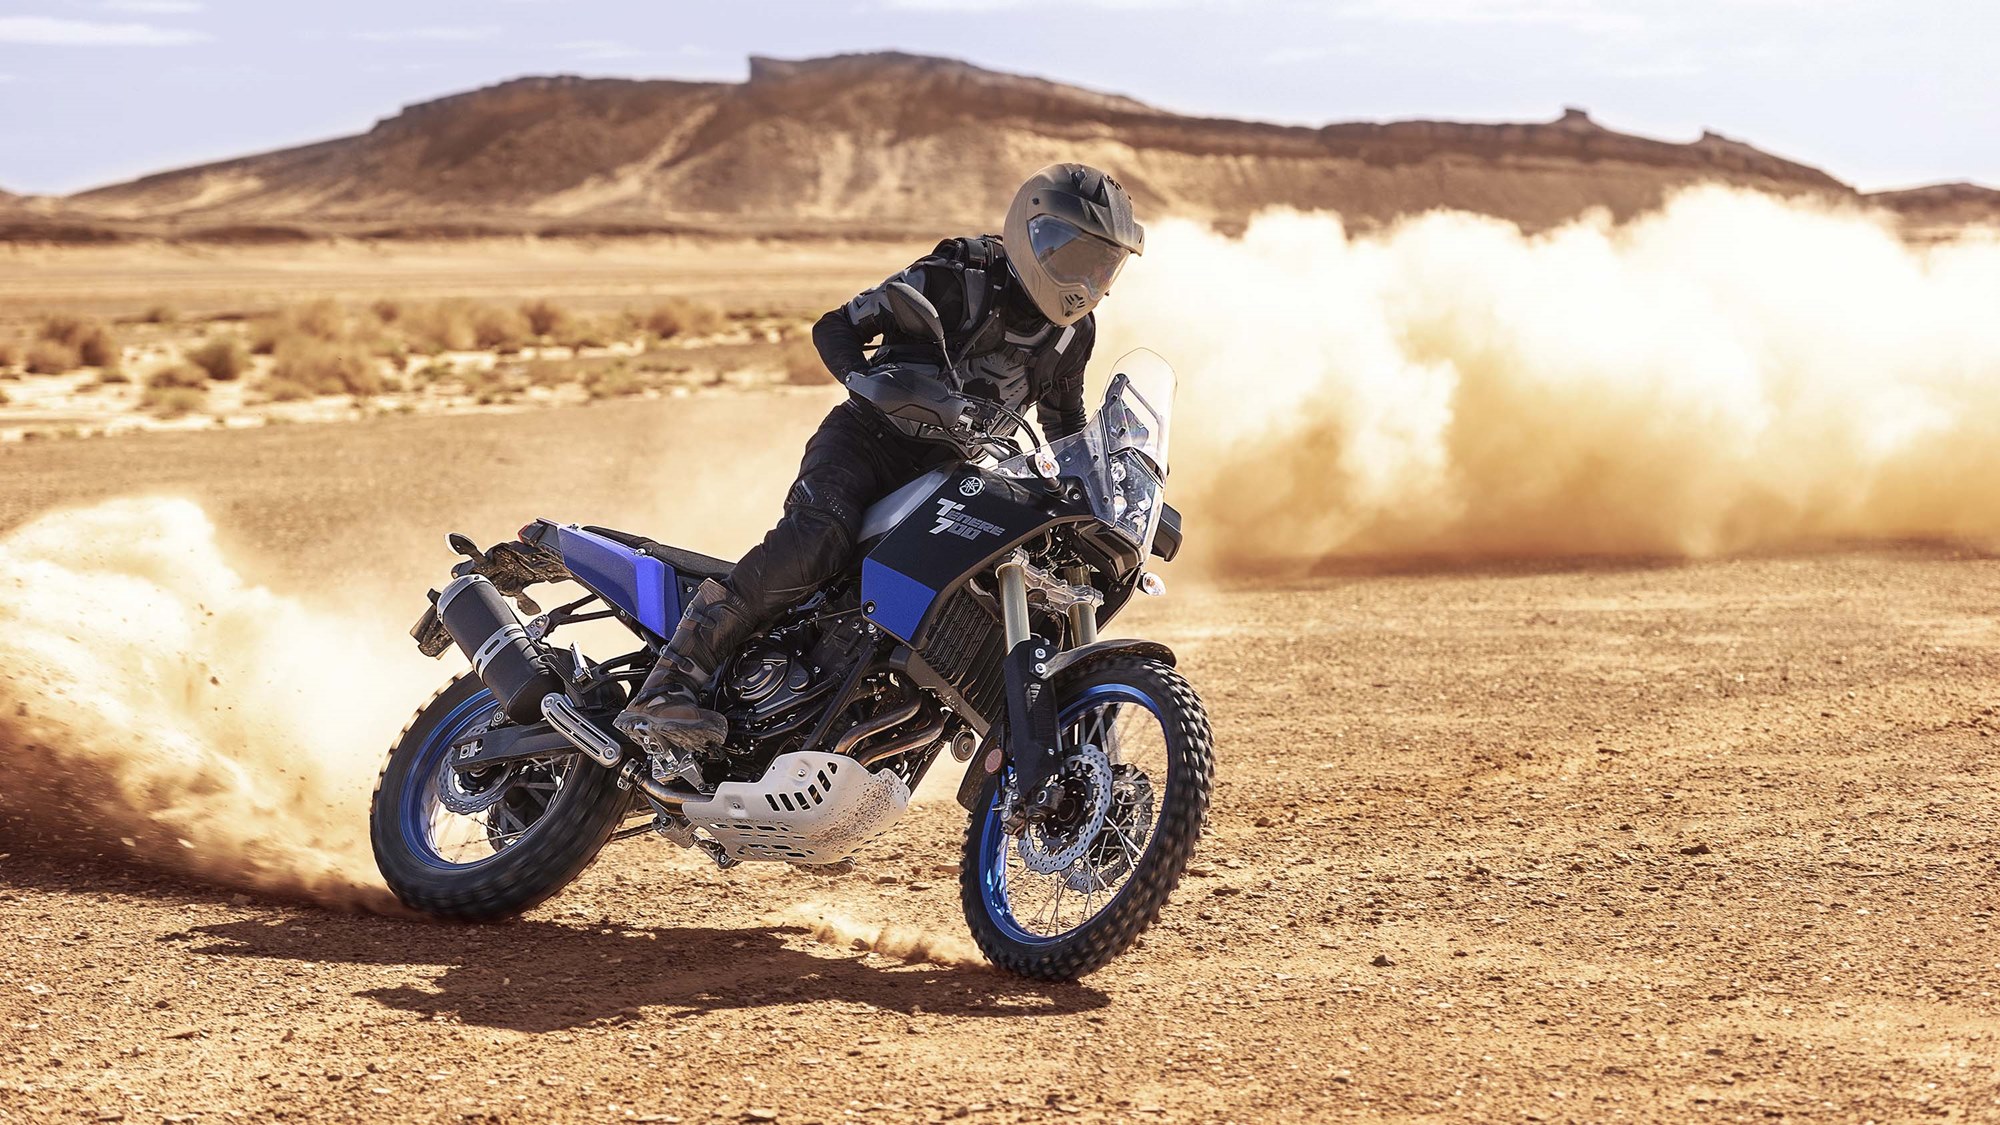 Yamaha Tenere 700 launched in the Philippines: Is India next?. IAMABIKER Motorcycle!